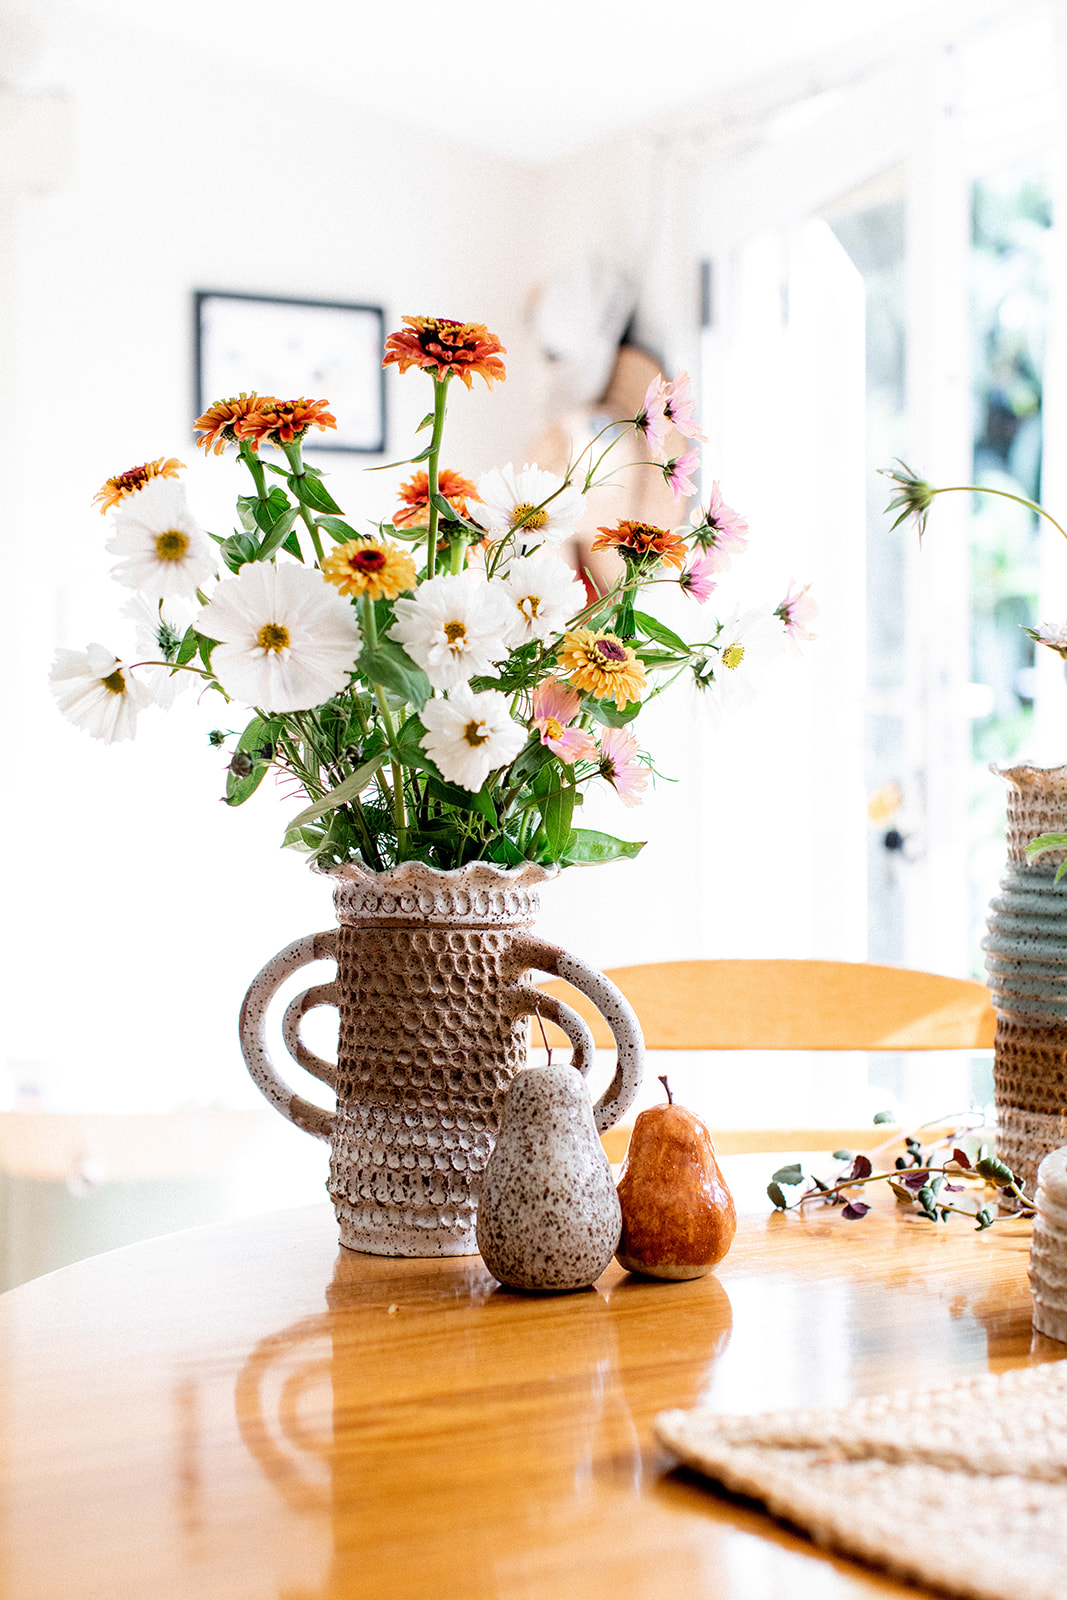 Image shows a vase with cosmos flowers and pears by Christie Lange in her Artist Profile Art Trails Tasmania